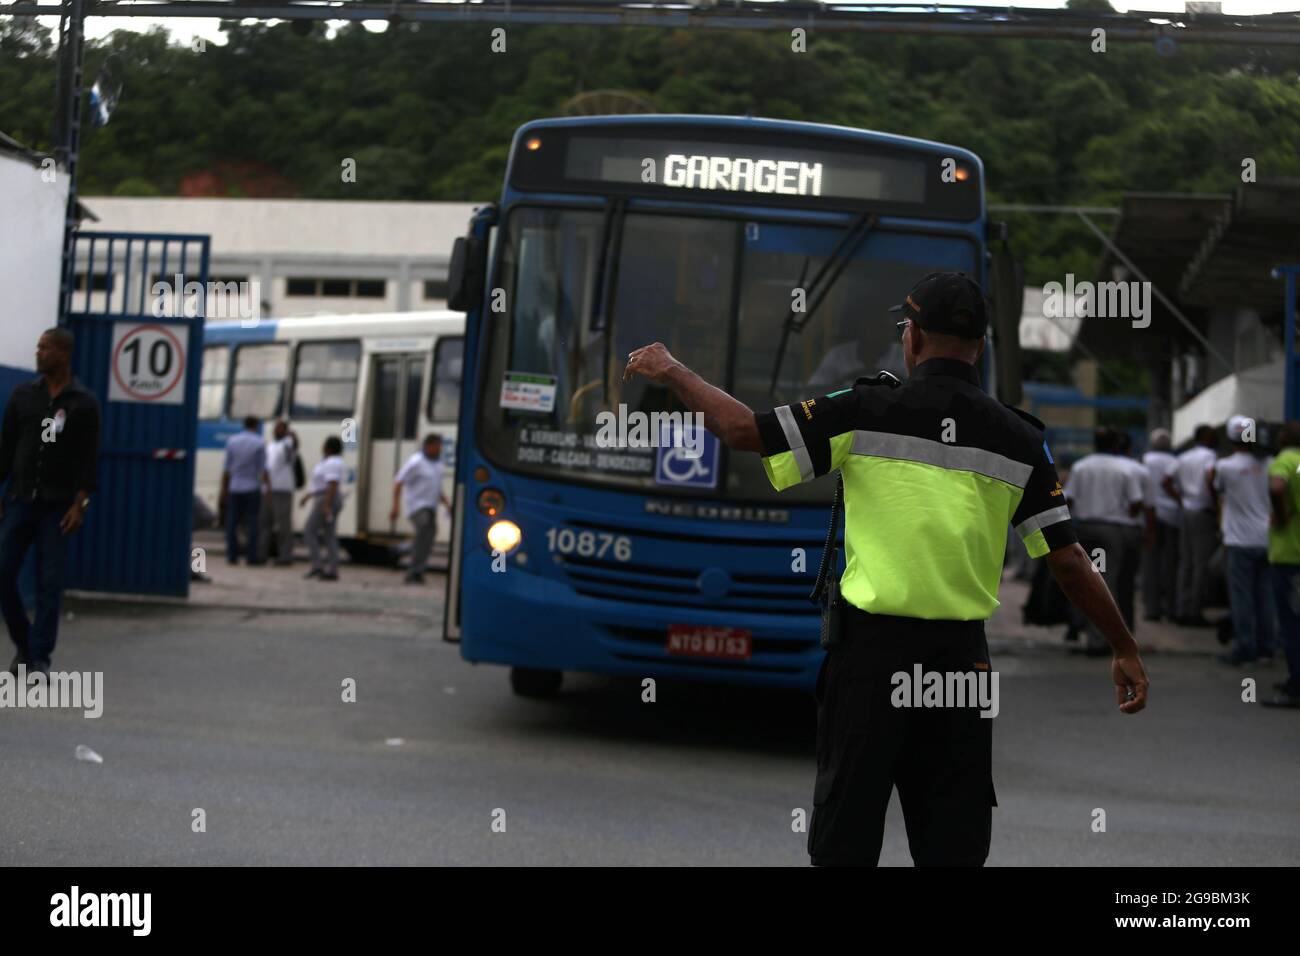 salvador, bahia, brazil - april 4, 2019: Bus driver are seen in during gravel movement in a company garage in the city of Salvador. *** Local Caption Stock Photo